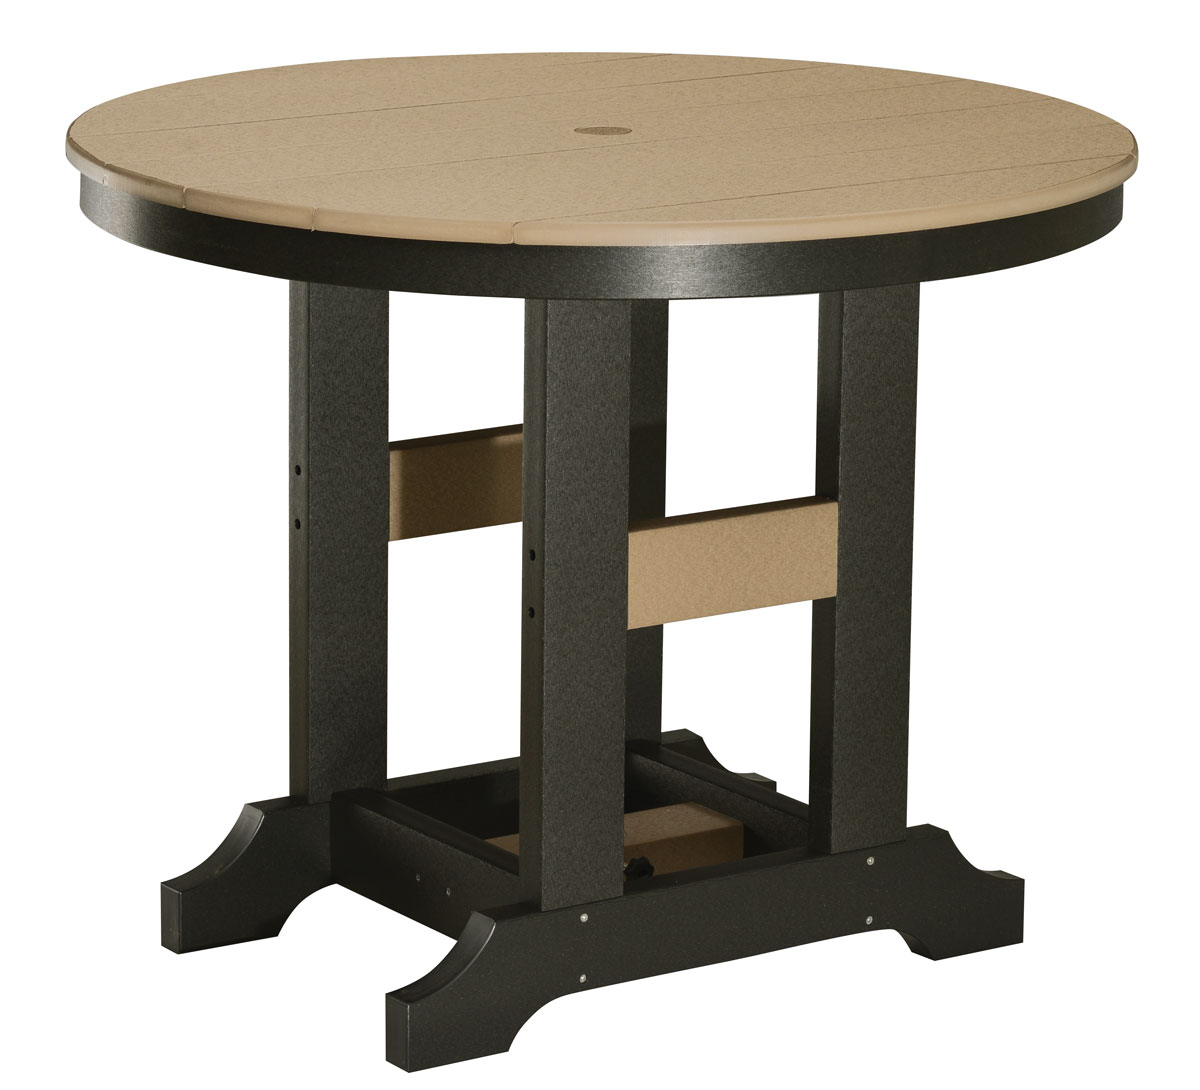 Garden Classic 38 inch Round Table